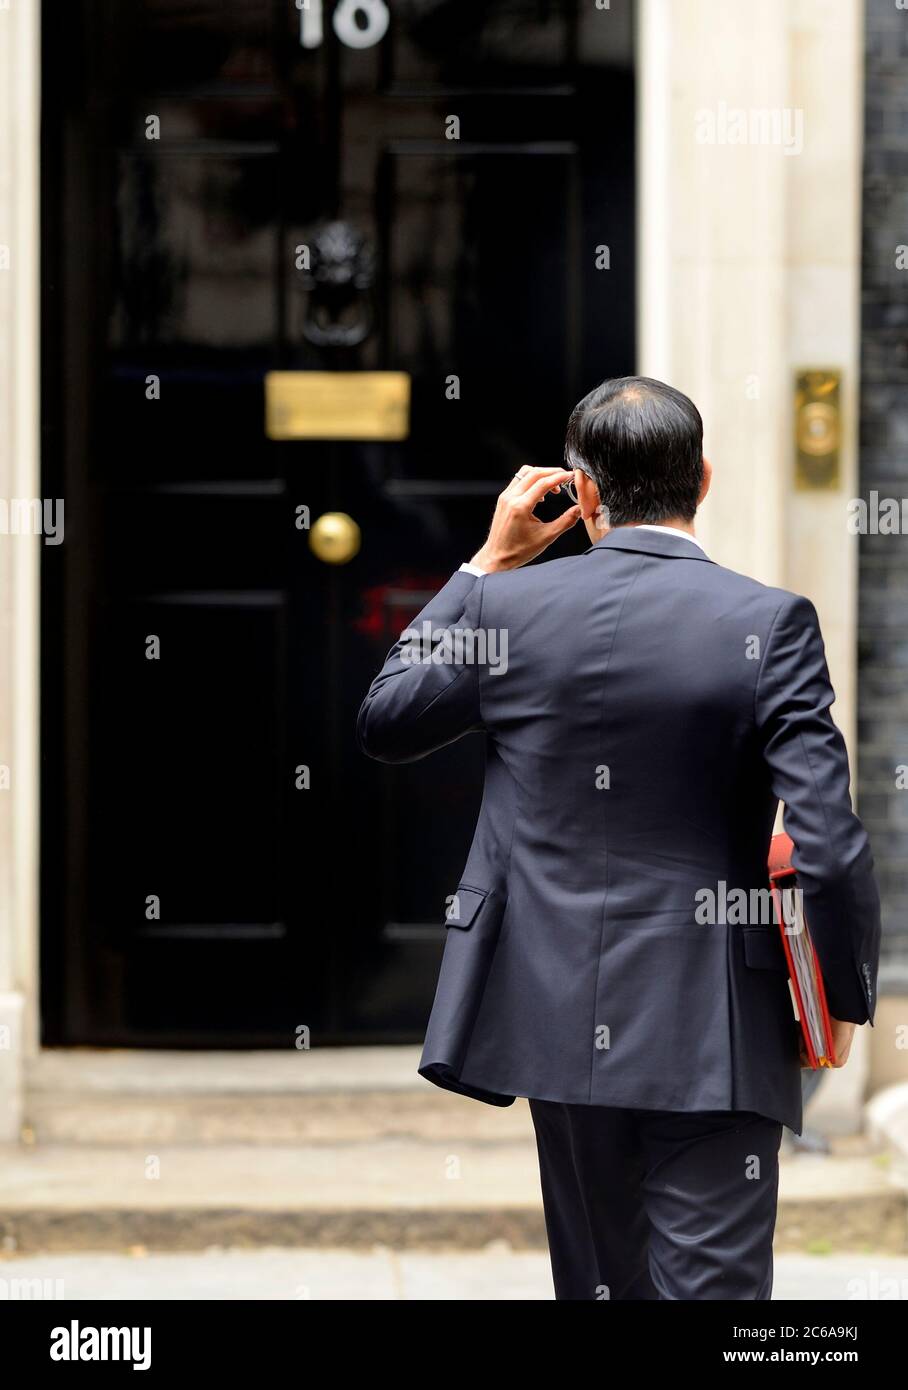 Rishi Sunak MP - Chancellor of the Exchequer - arriving at 10 Downing Street after answering Treasury Questions in Parliament, 7th July 2020 Stock Photo